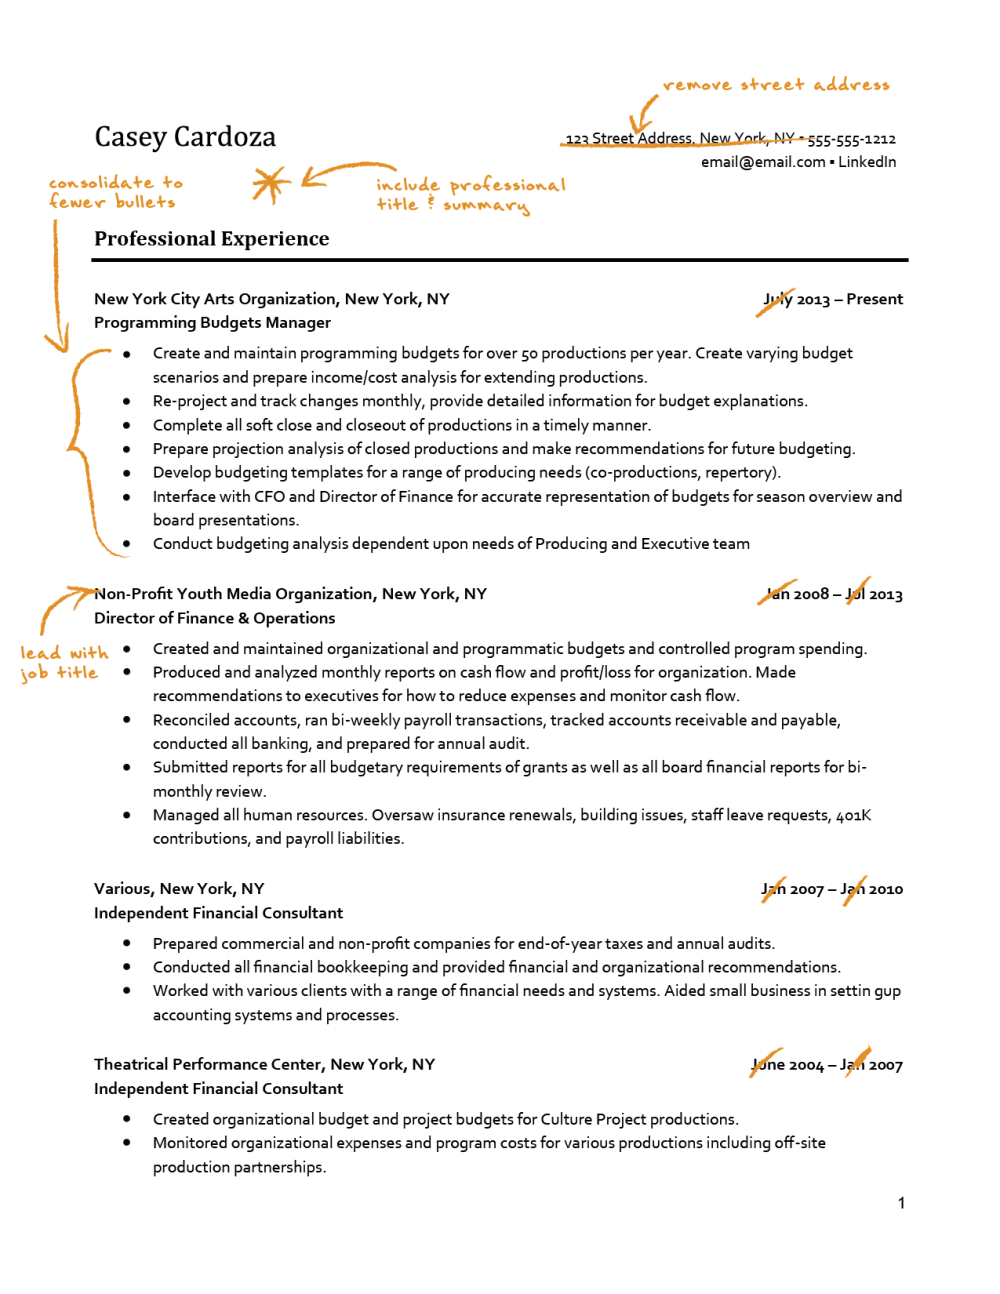 information about resume writing